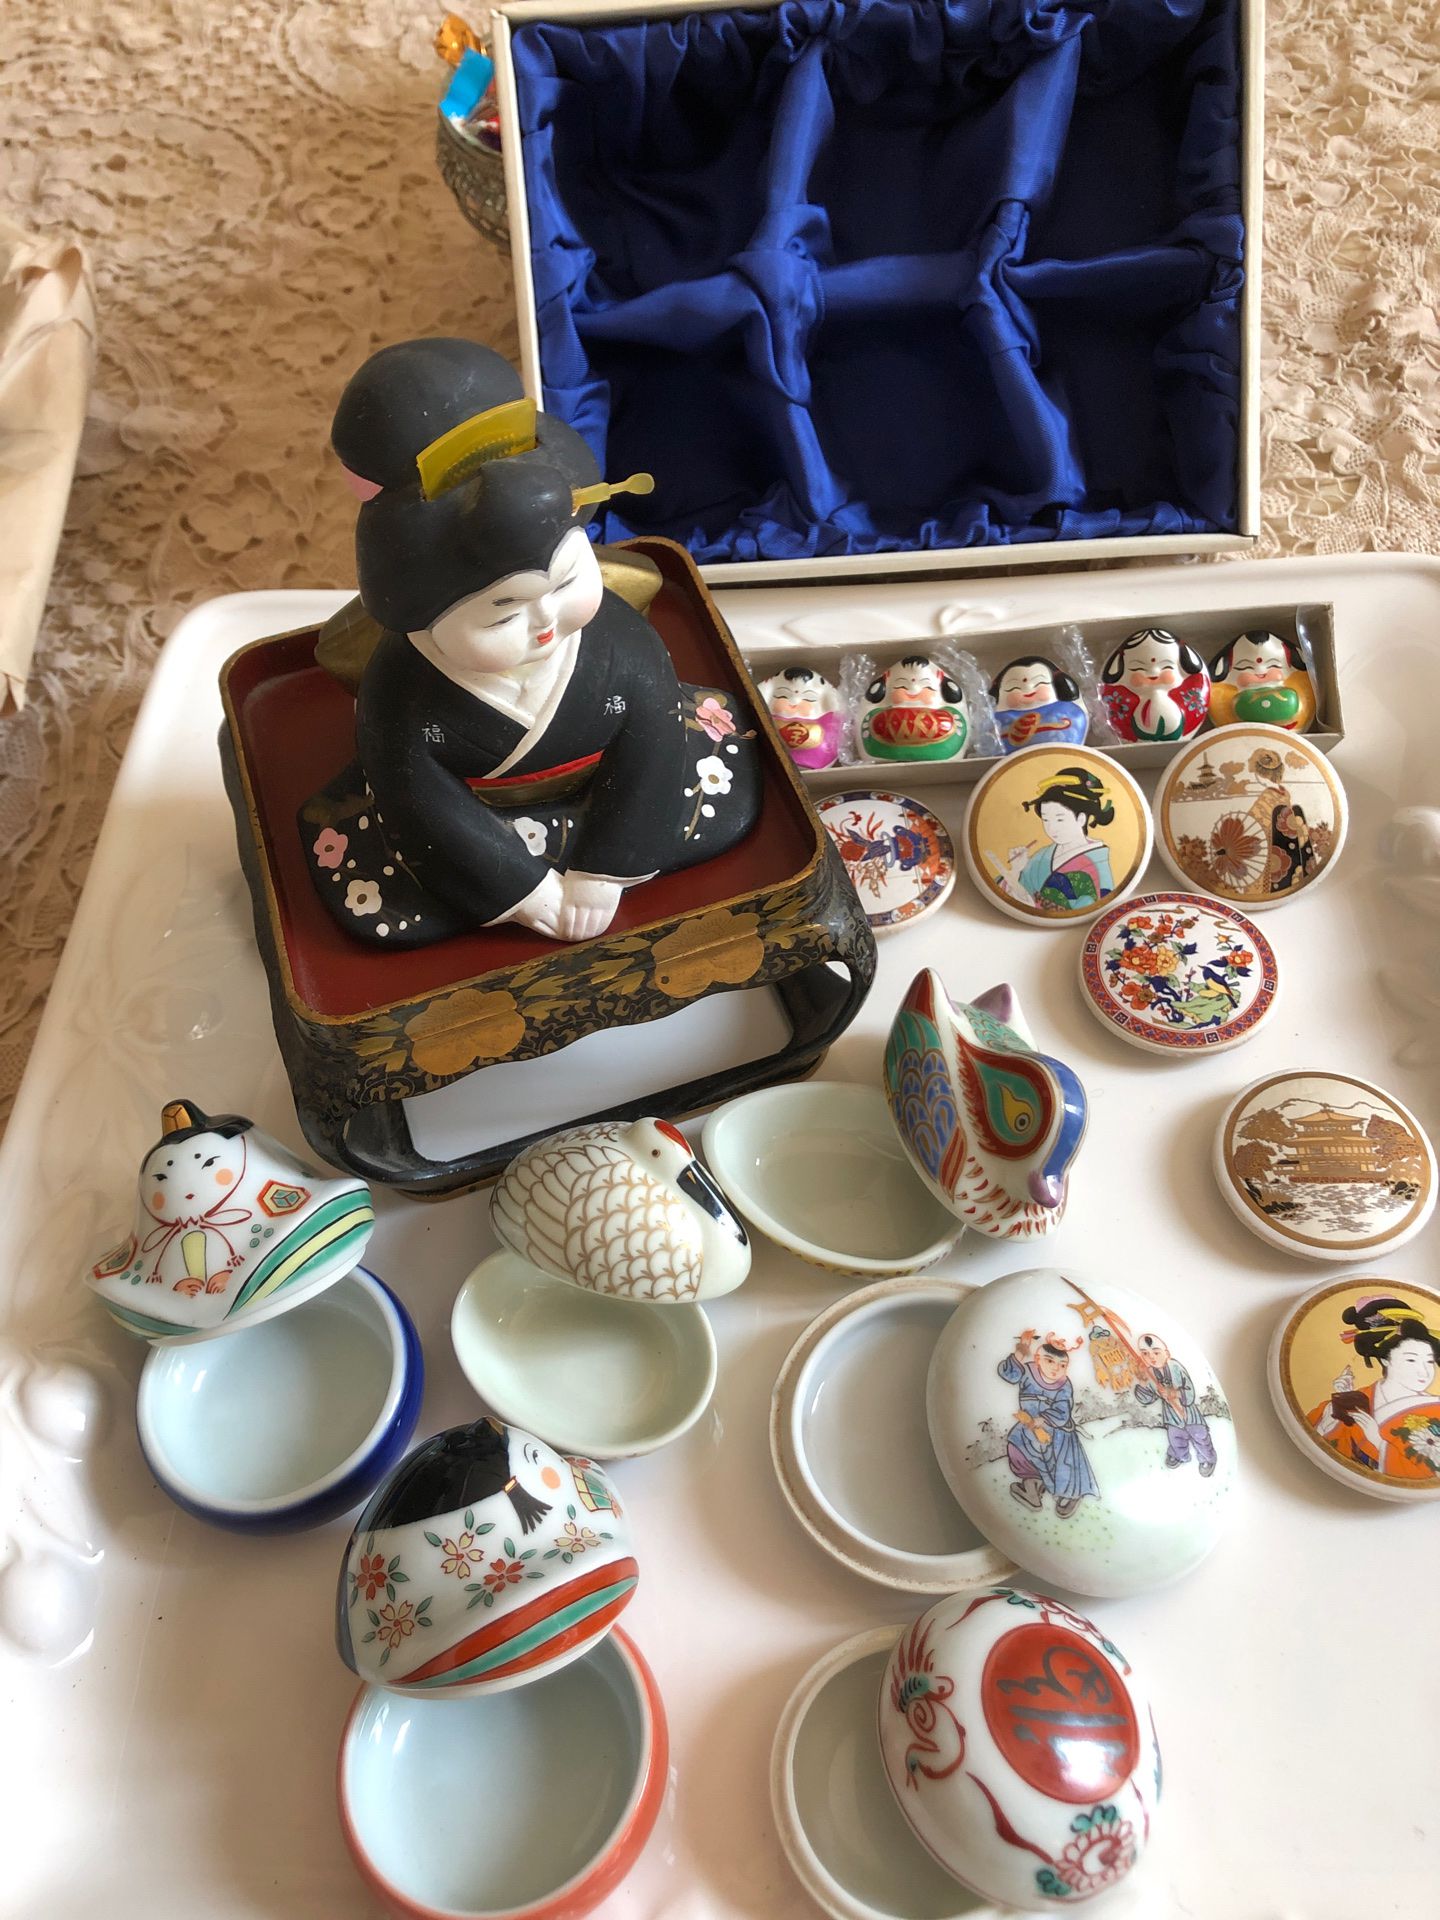 Collection of miniature Chinese porcelain items